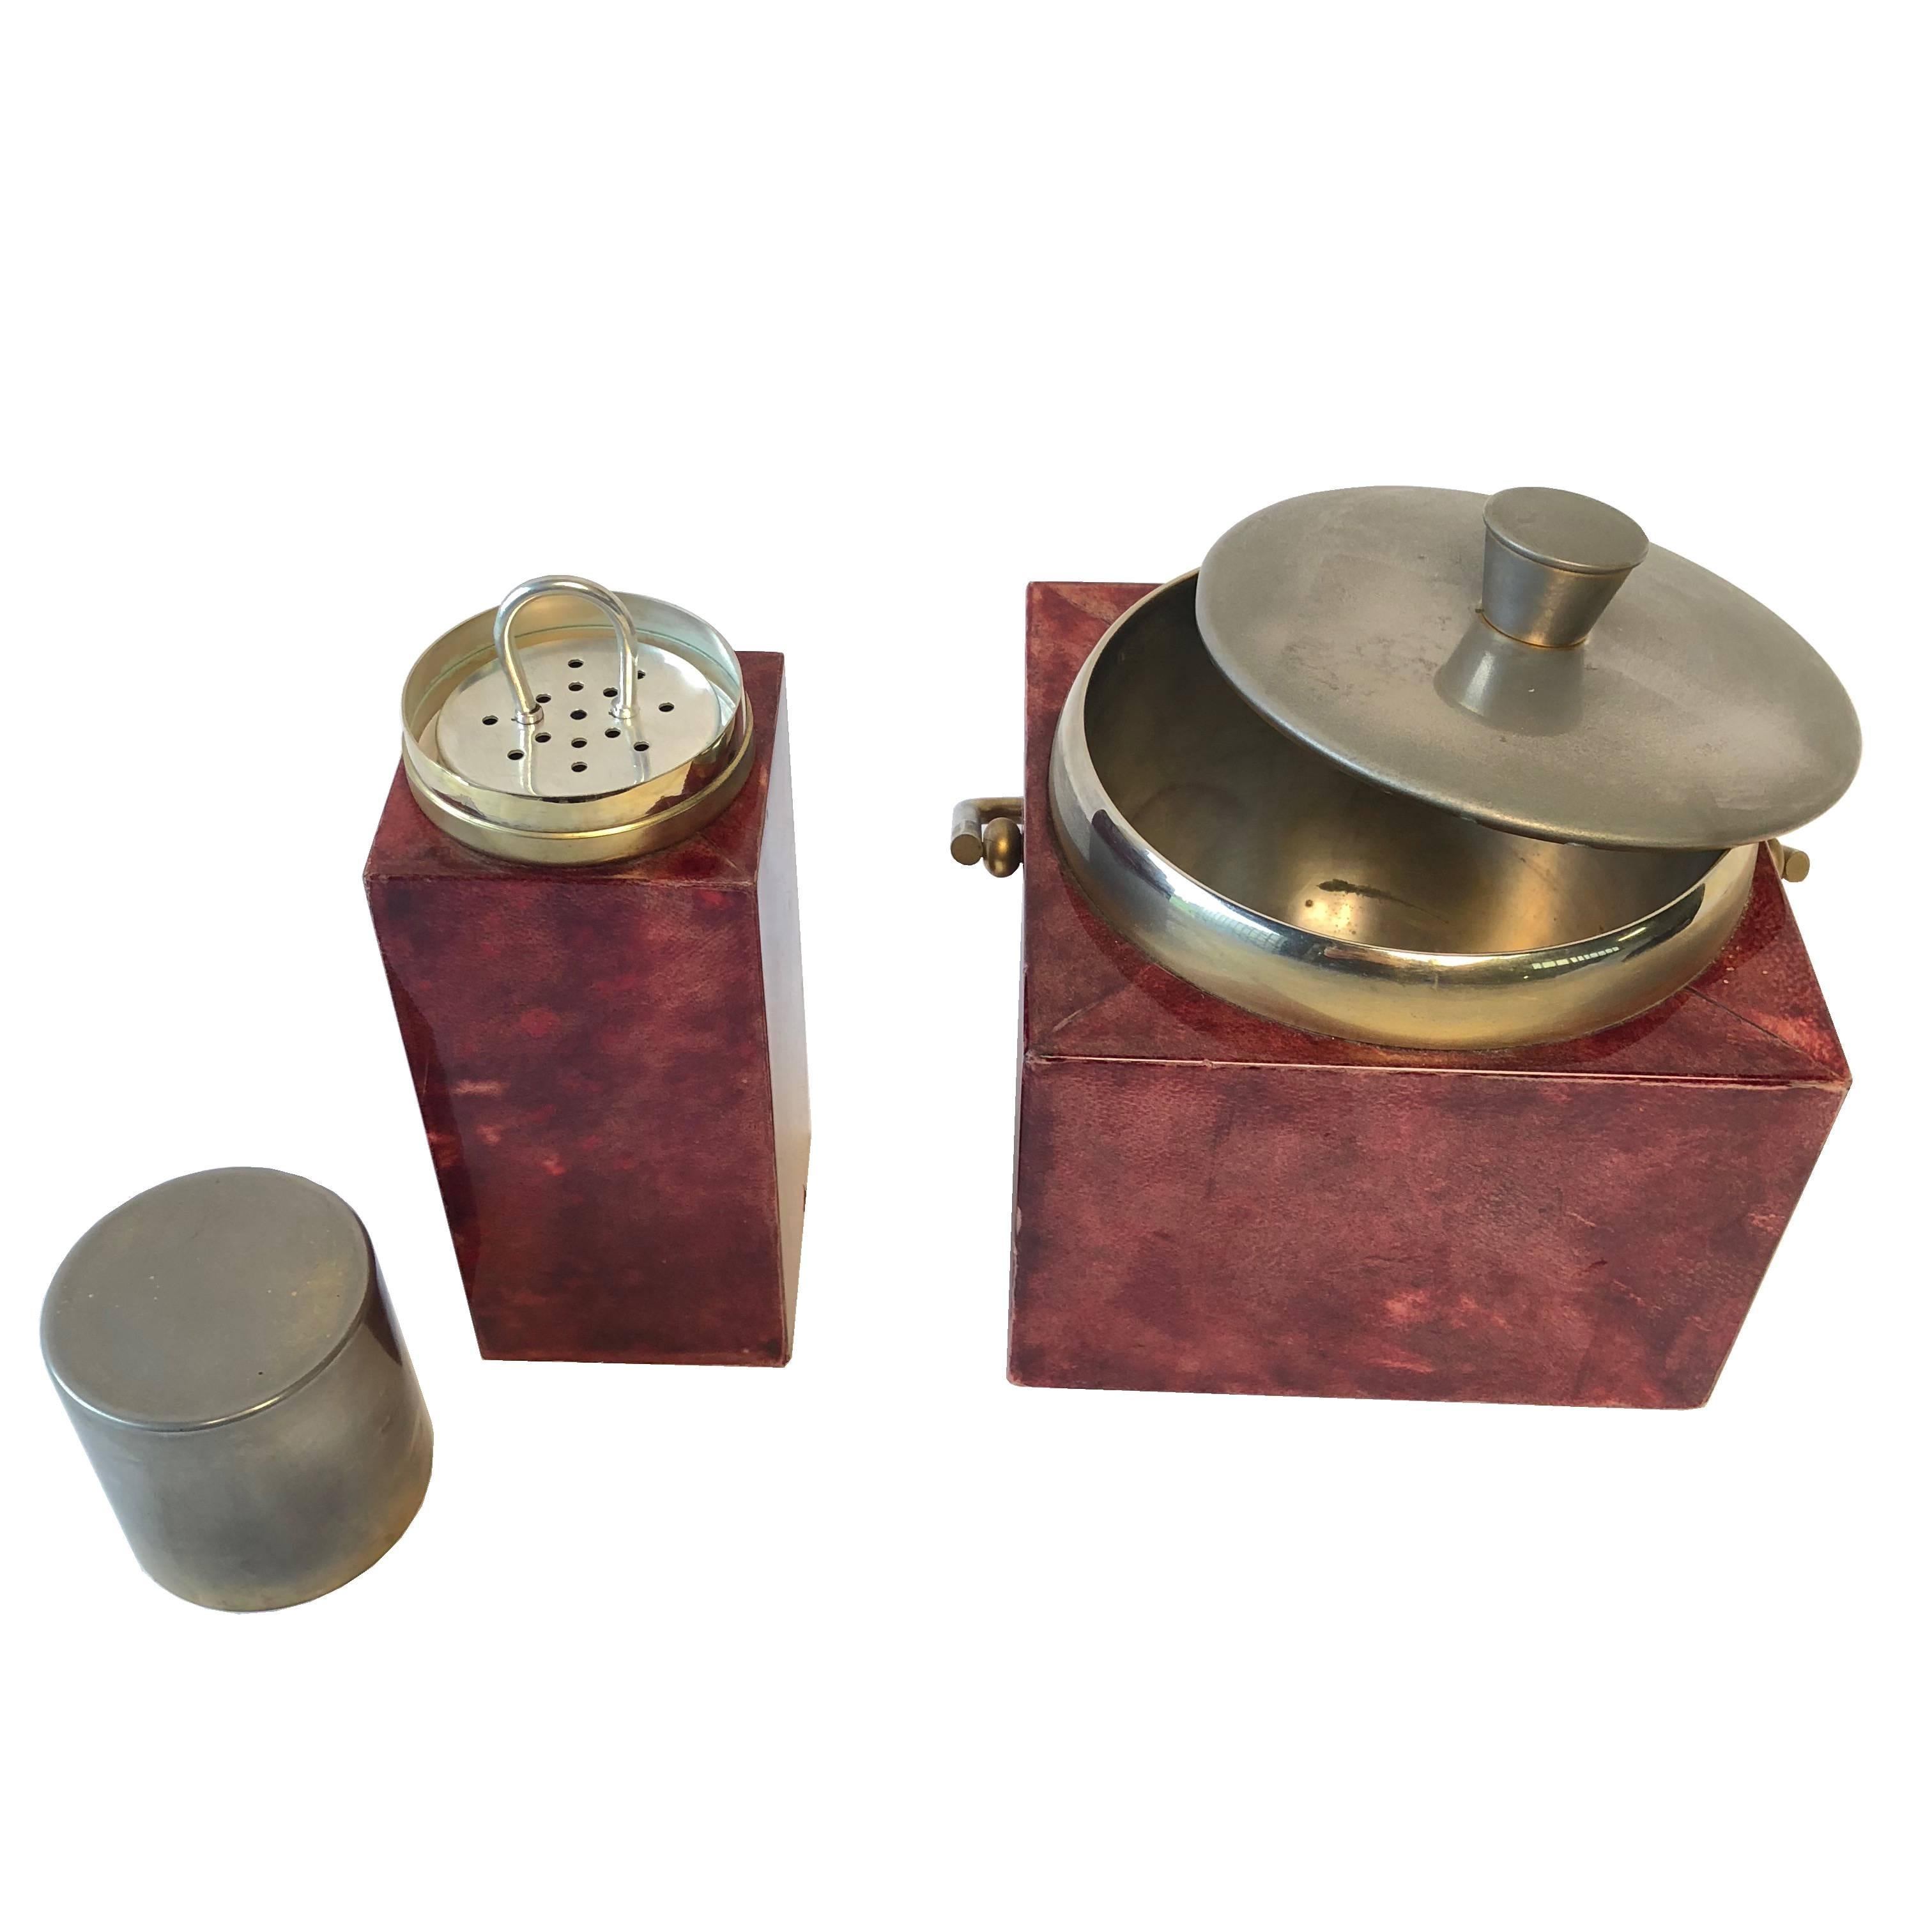 Ice bucket set bar complete with ice Shaker.
The materials used are colored goatskin and brass.
Good conditions considering its age.

Ice bucket dimensions: 17 x 17 x 12 cm;
Shaker dimensions: 7.5 x 7.5 x 24.5 cm.